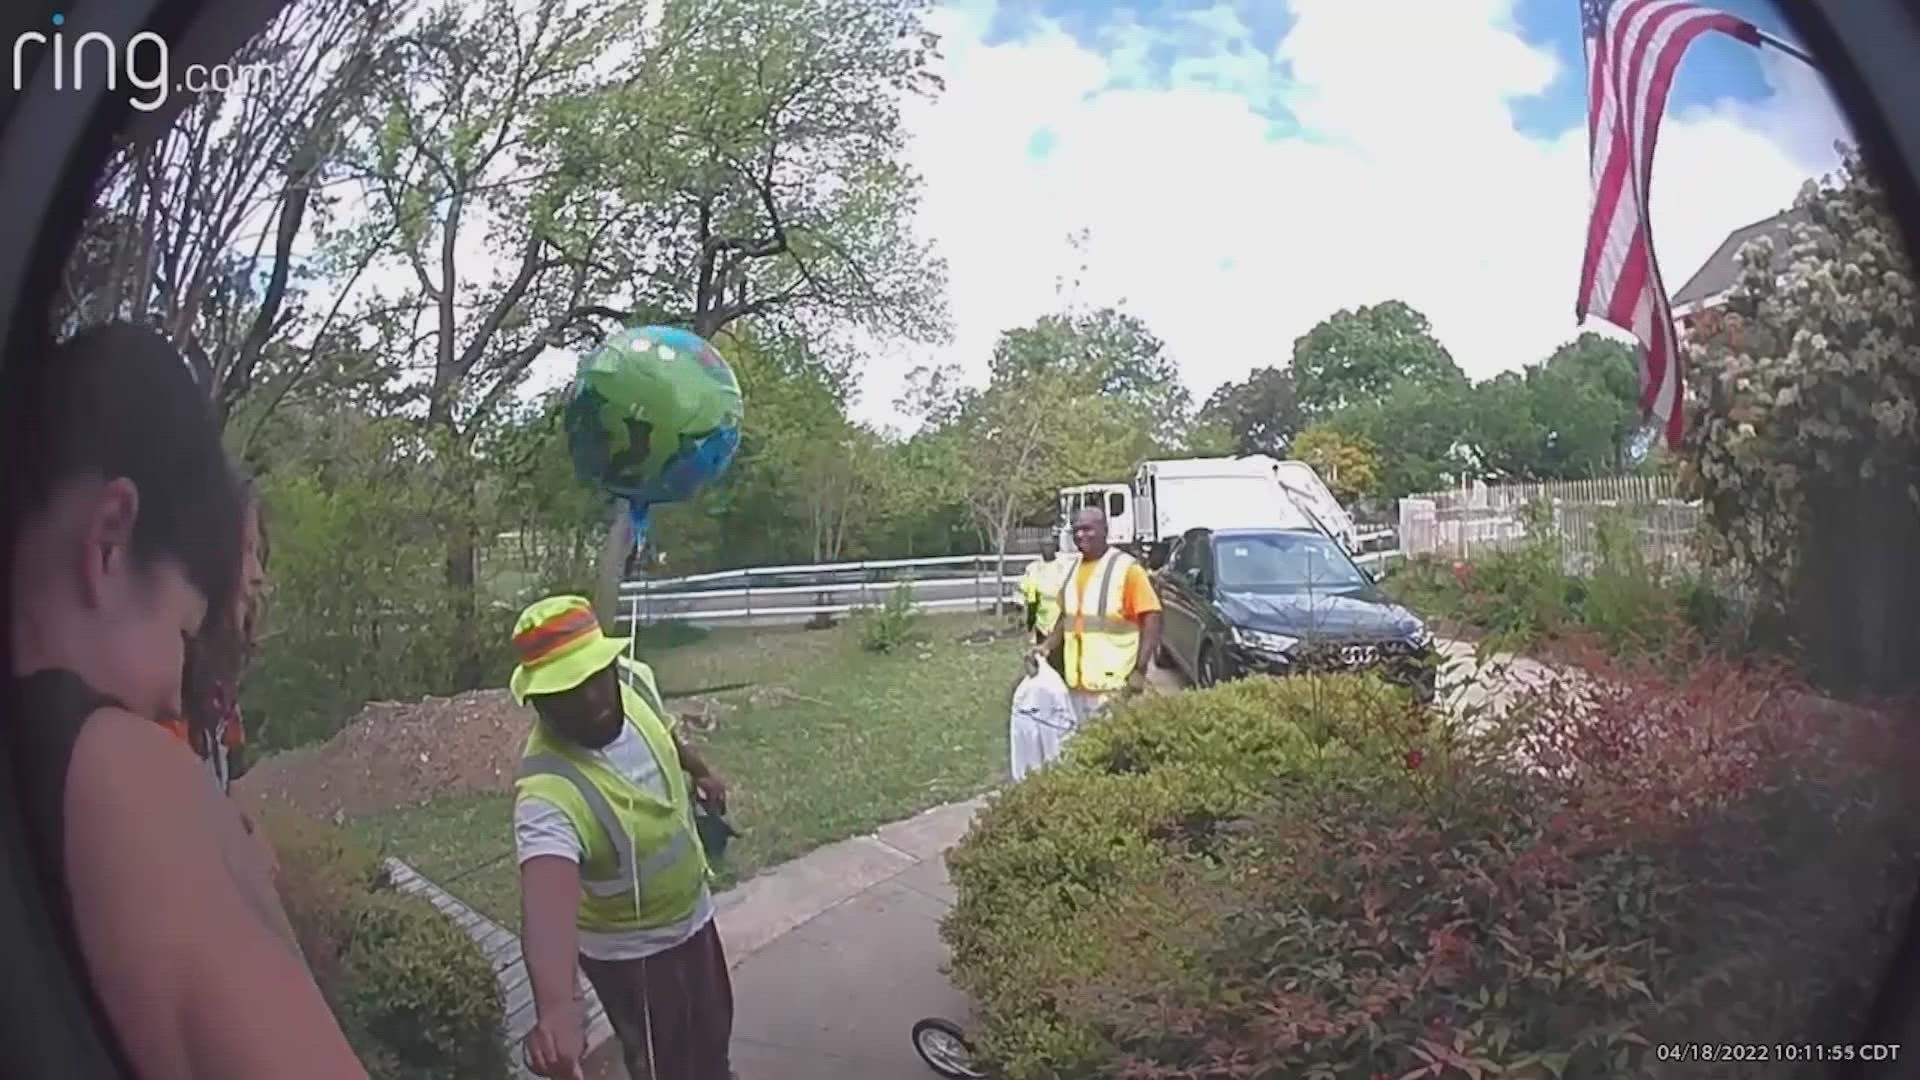 The sanitation team is seen knocking on the family’s door to surprise their little buddy with balloons and a bag of toys, after hearing the boy had a tough week.